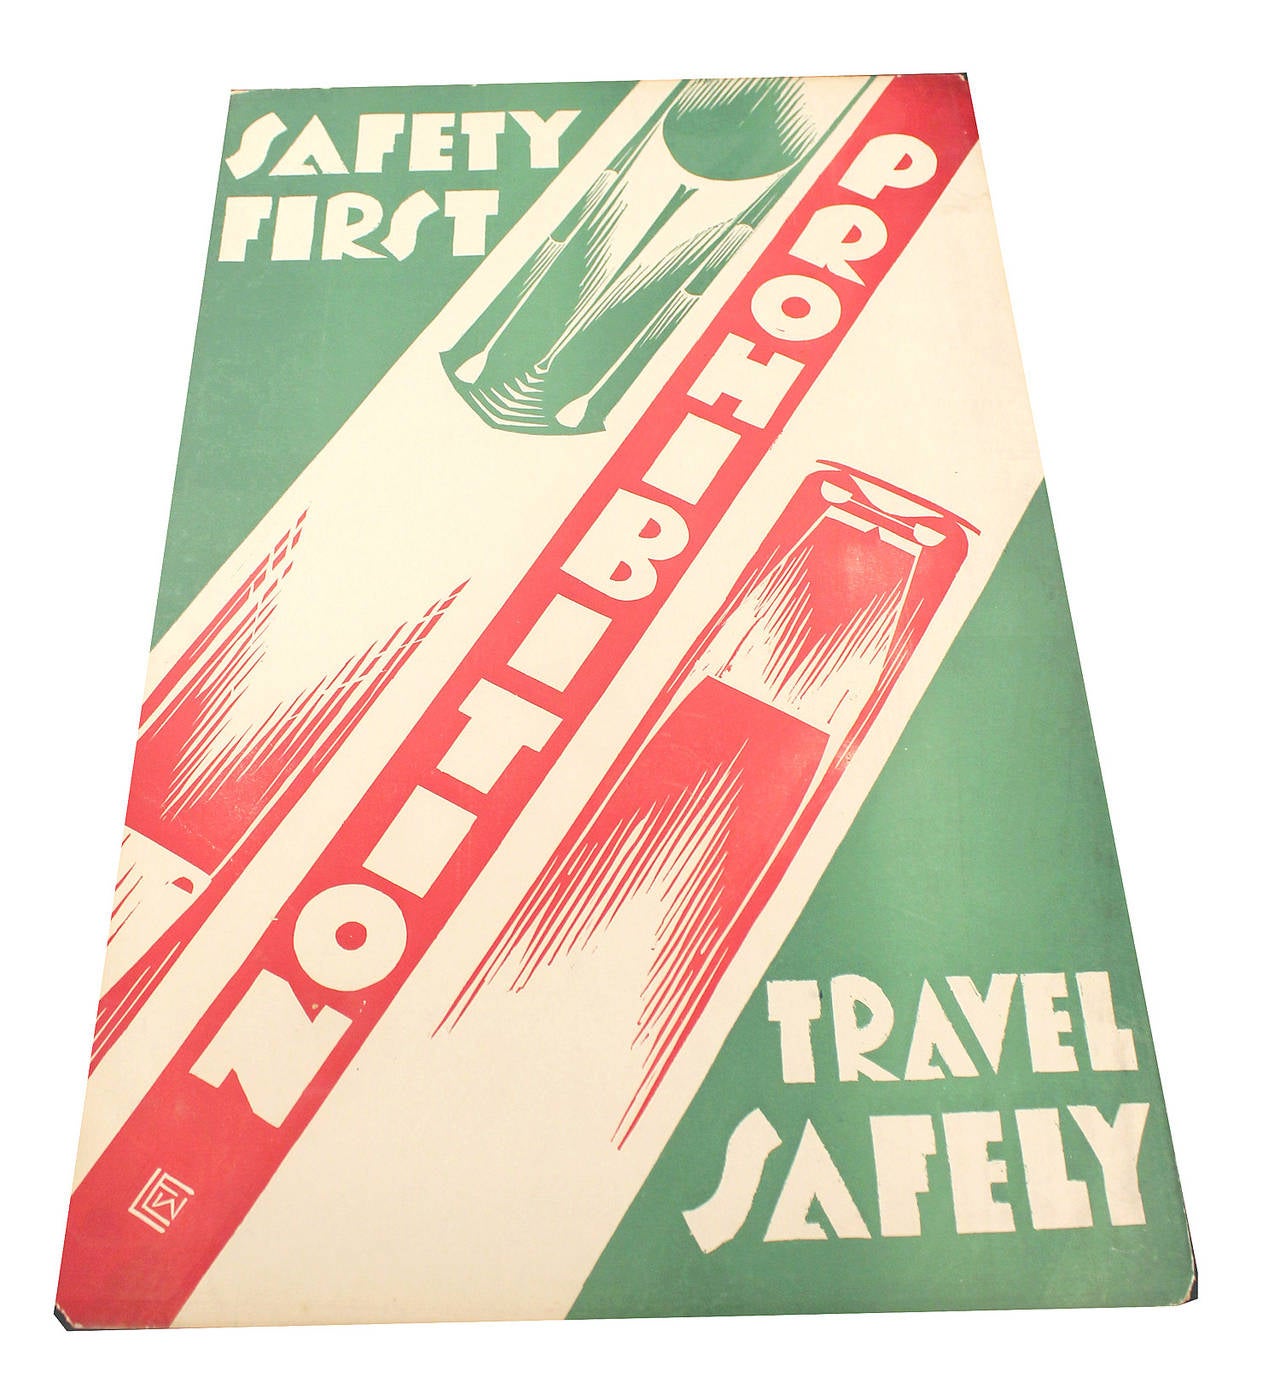 Fantastic Art Deco modernist lithograpy poster from the USA alcohol prohibition era, highly stylised with cars racing on motorway.

The Art Deco style name was derived from the Exposition Internationale des Arts Décoratifs et Industriels